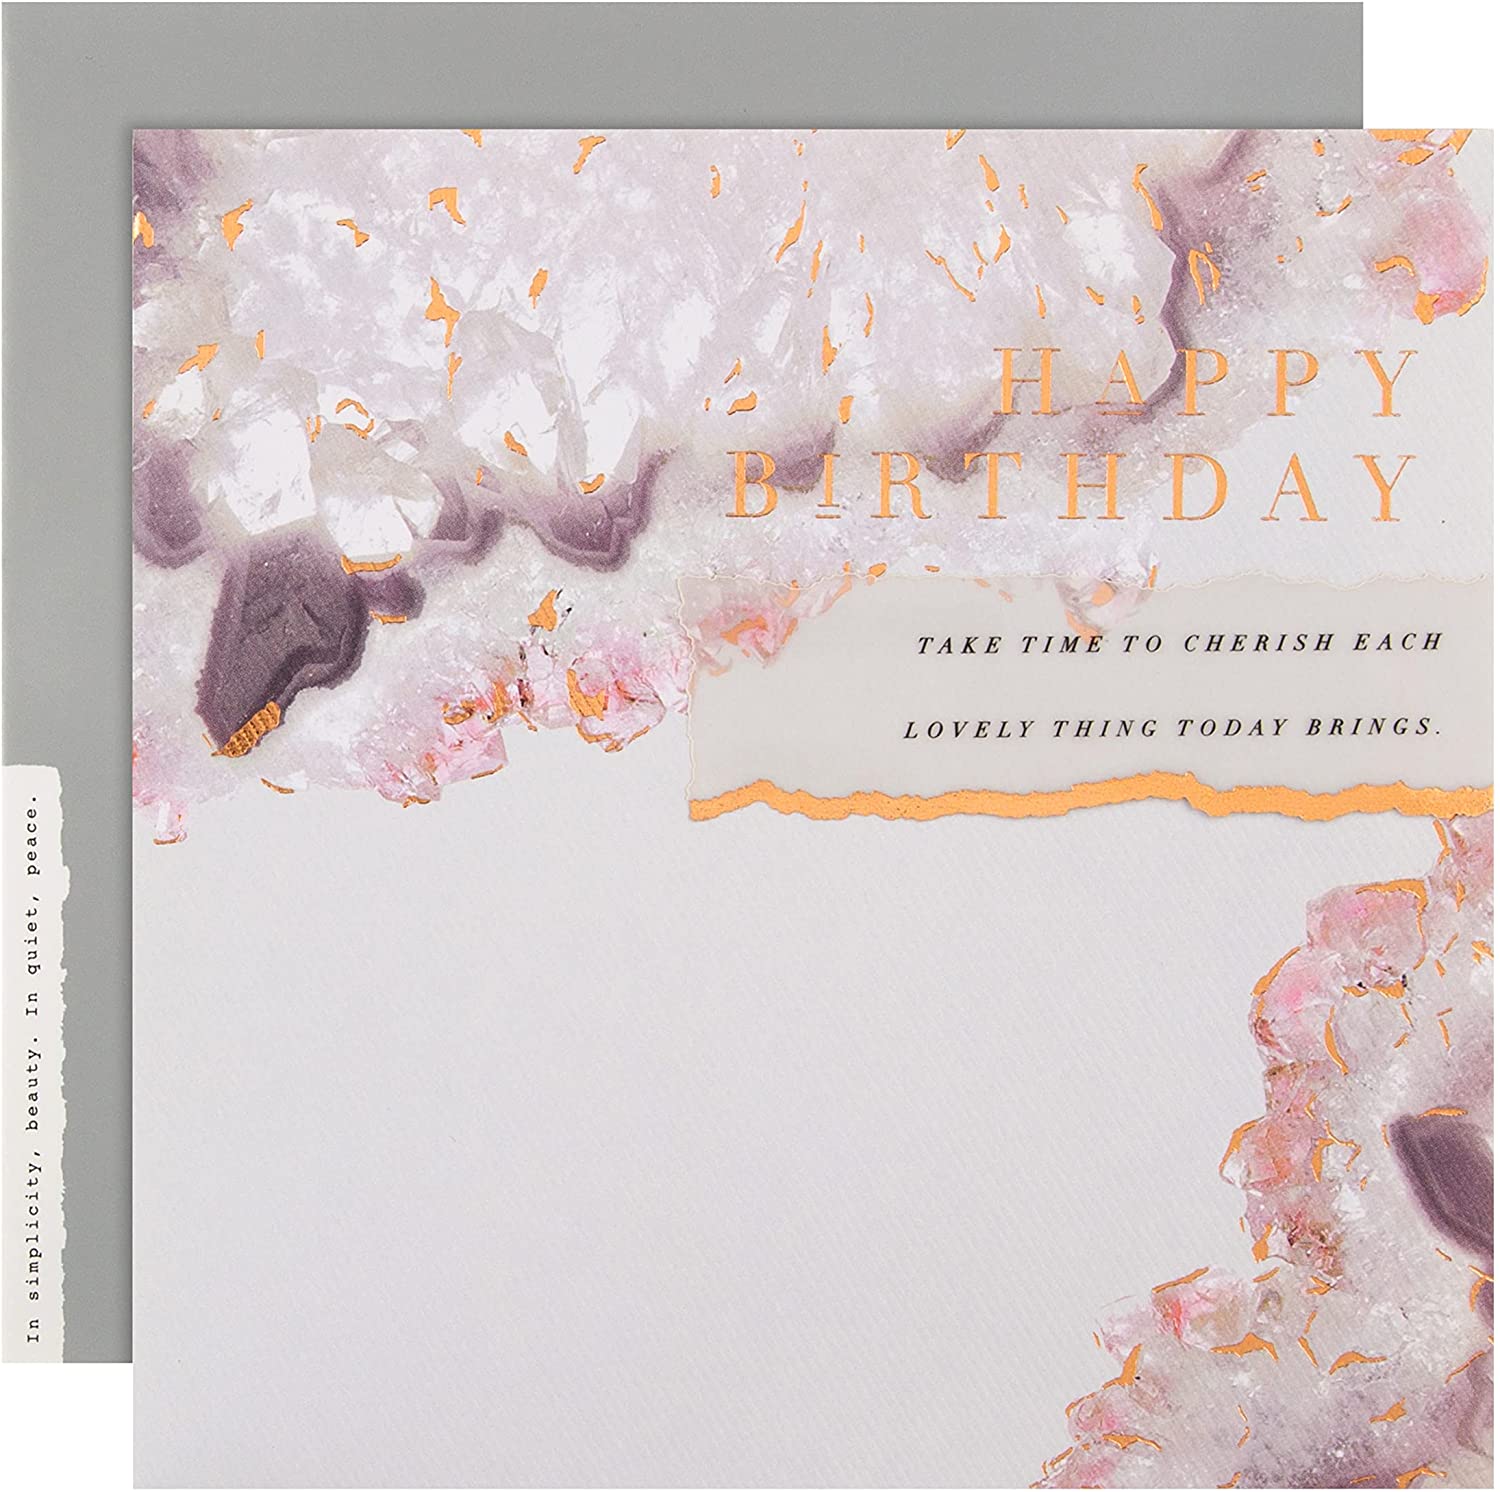 Hallmark Birthday Card ''Take Time To Cherish Each Lovely Thing Today Brings'' RRP 3.39 CLEARANCE XL 1.99